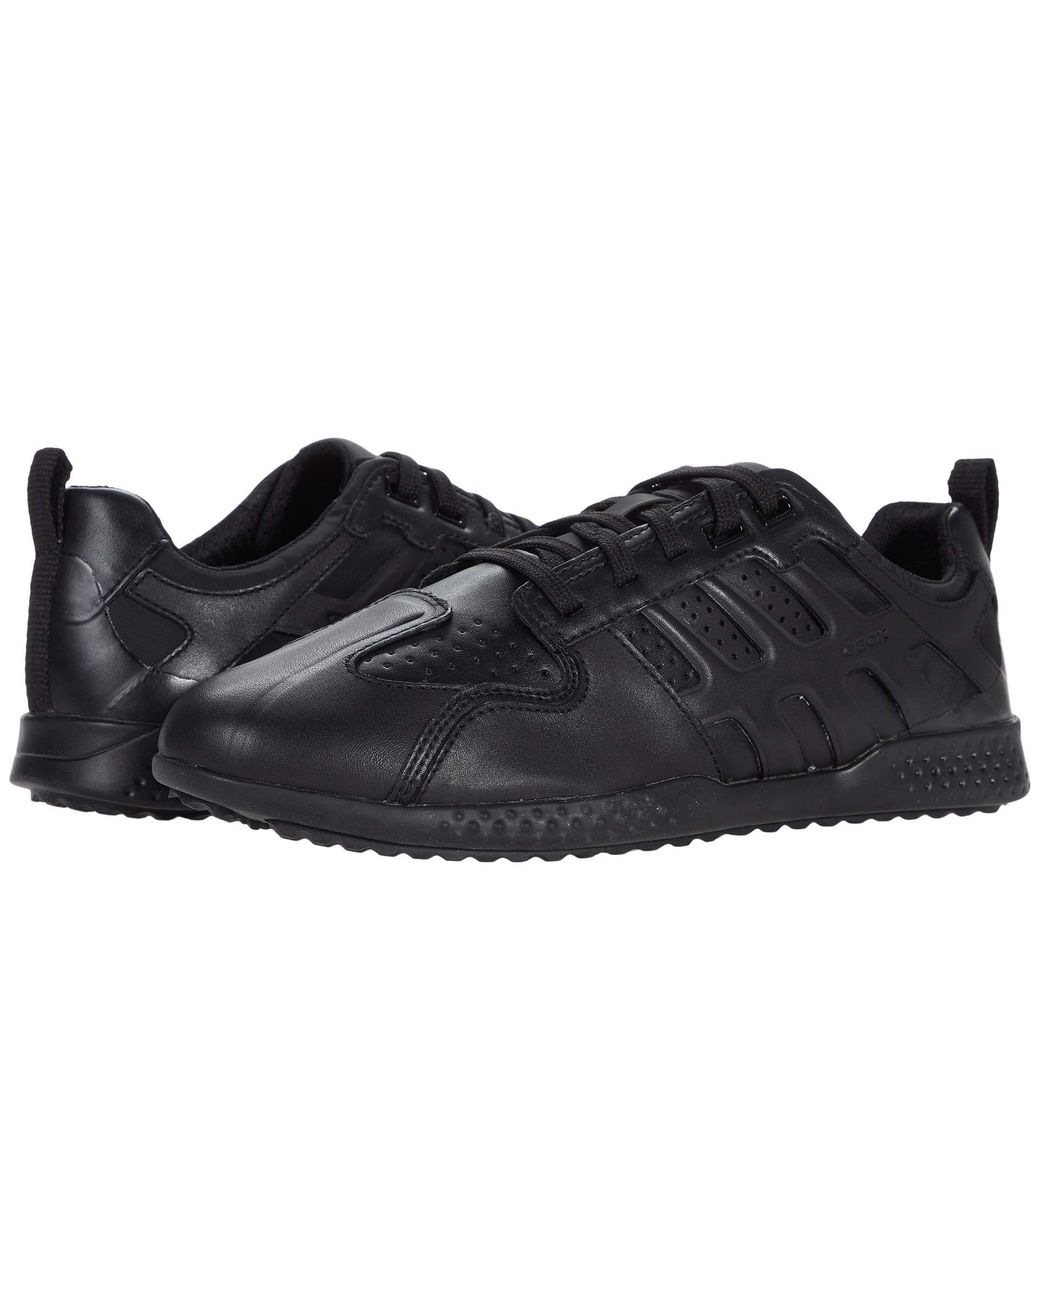 Geox Leather Snake 29 in Black for Men -